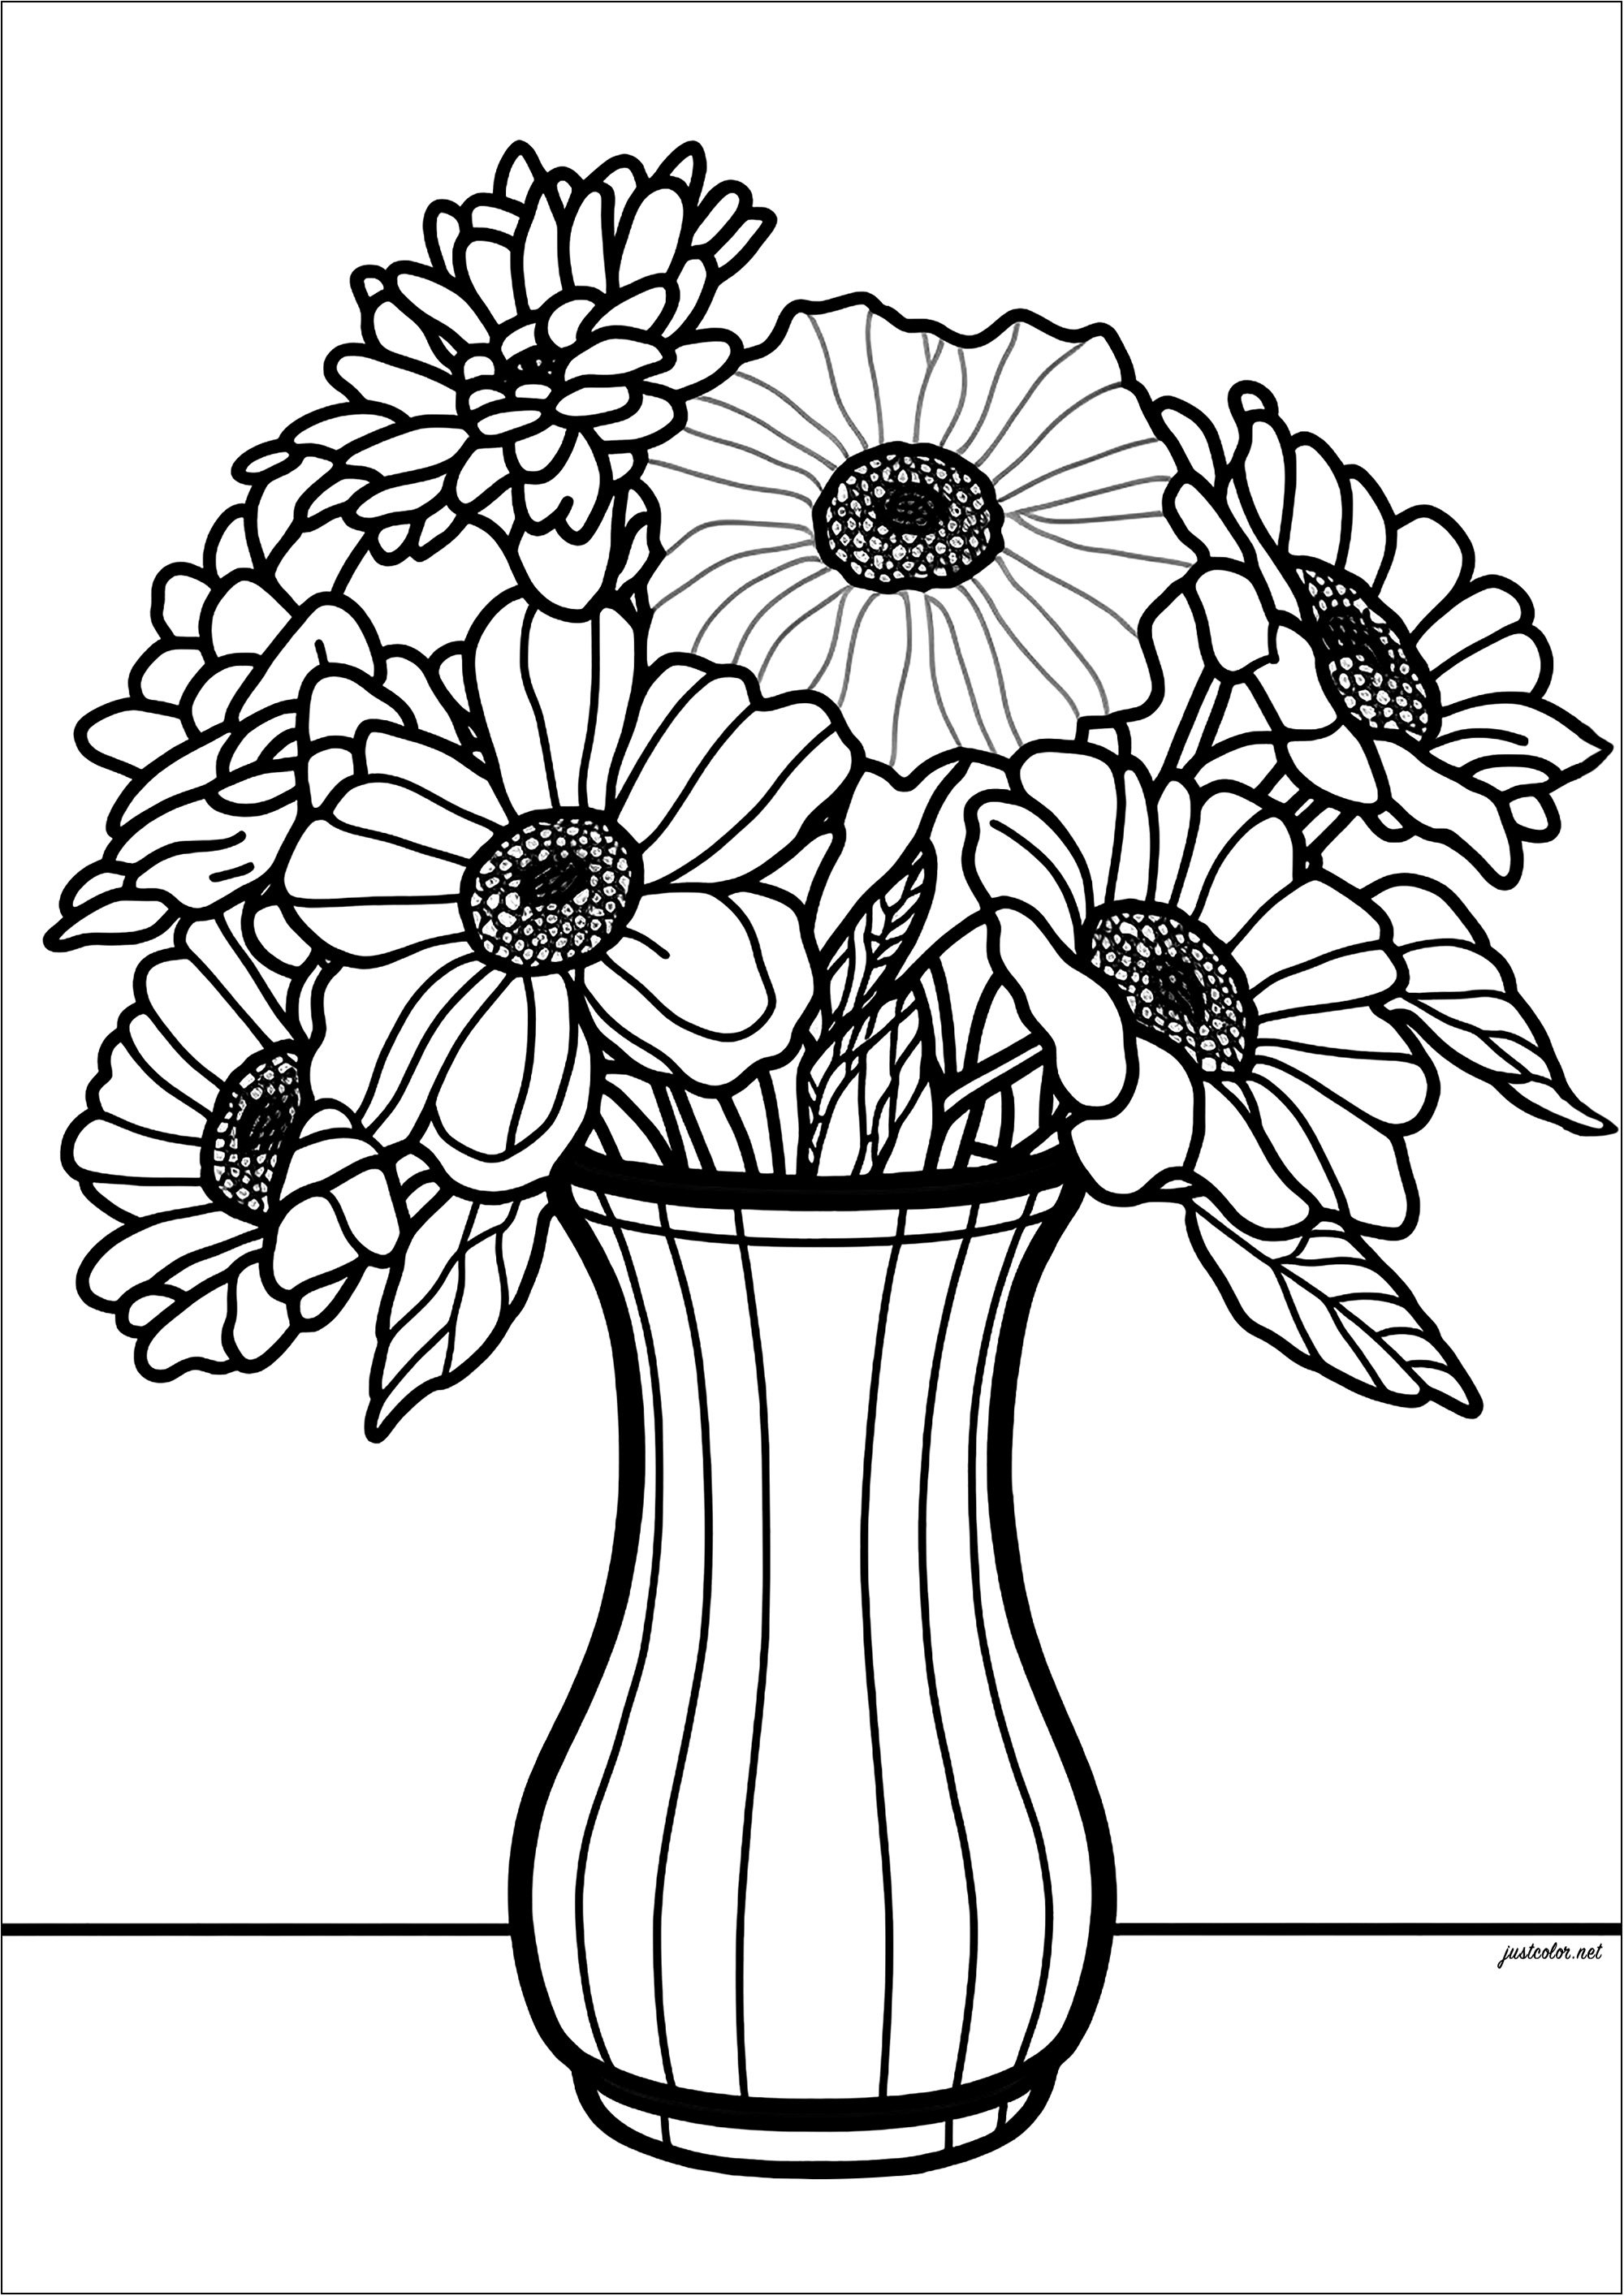 Thick-featured flowers in a beautiful vase. With your colors, this coloring book will be a real feast for the eyes. It's perfect for children and adults who want to escape into a world of color and beauty.